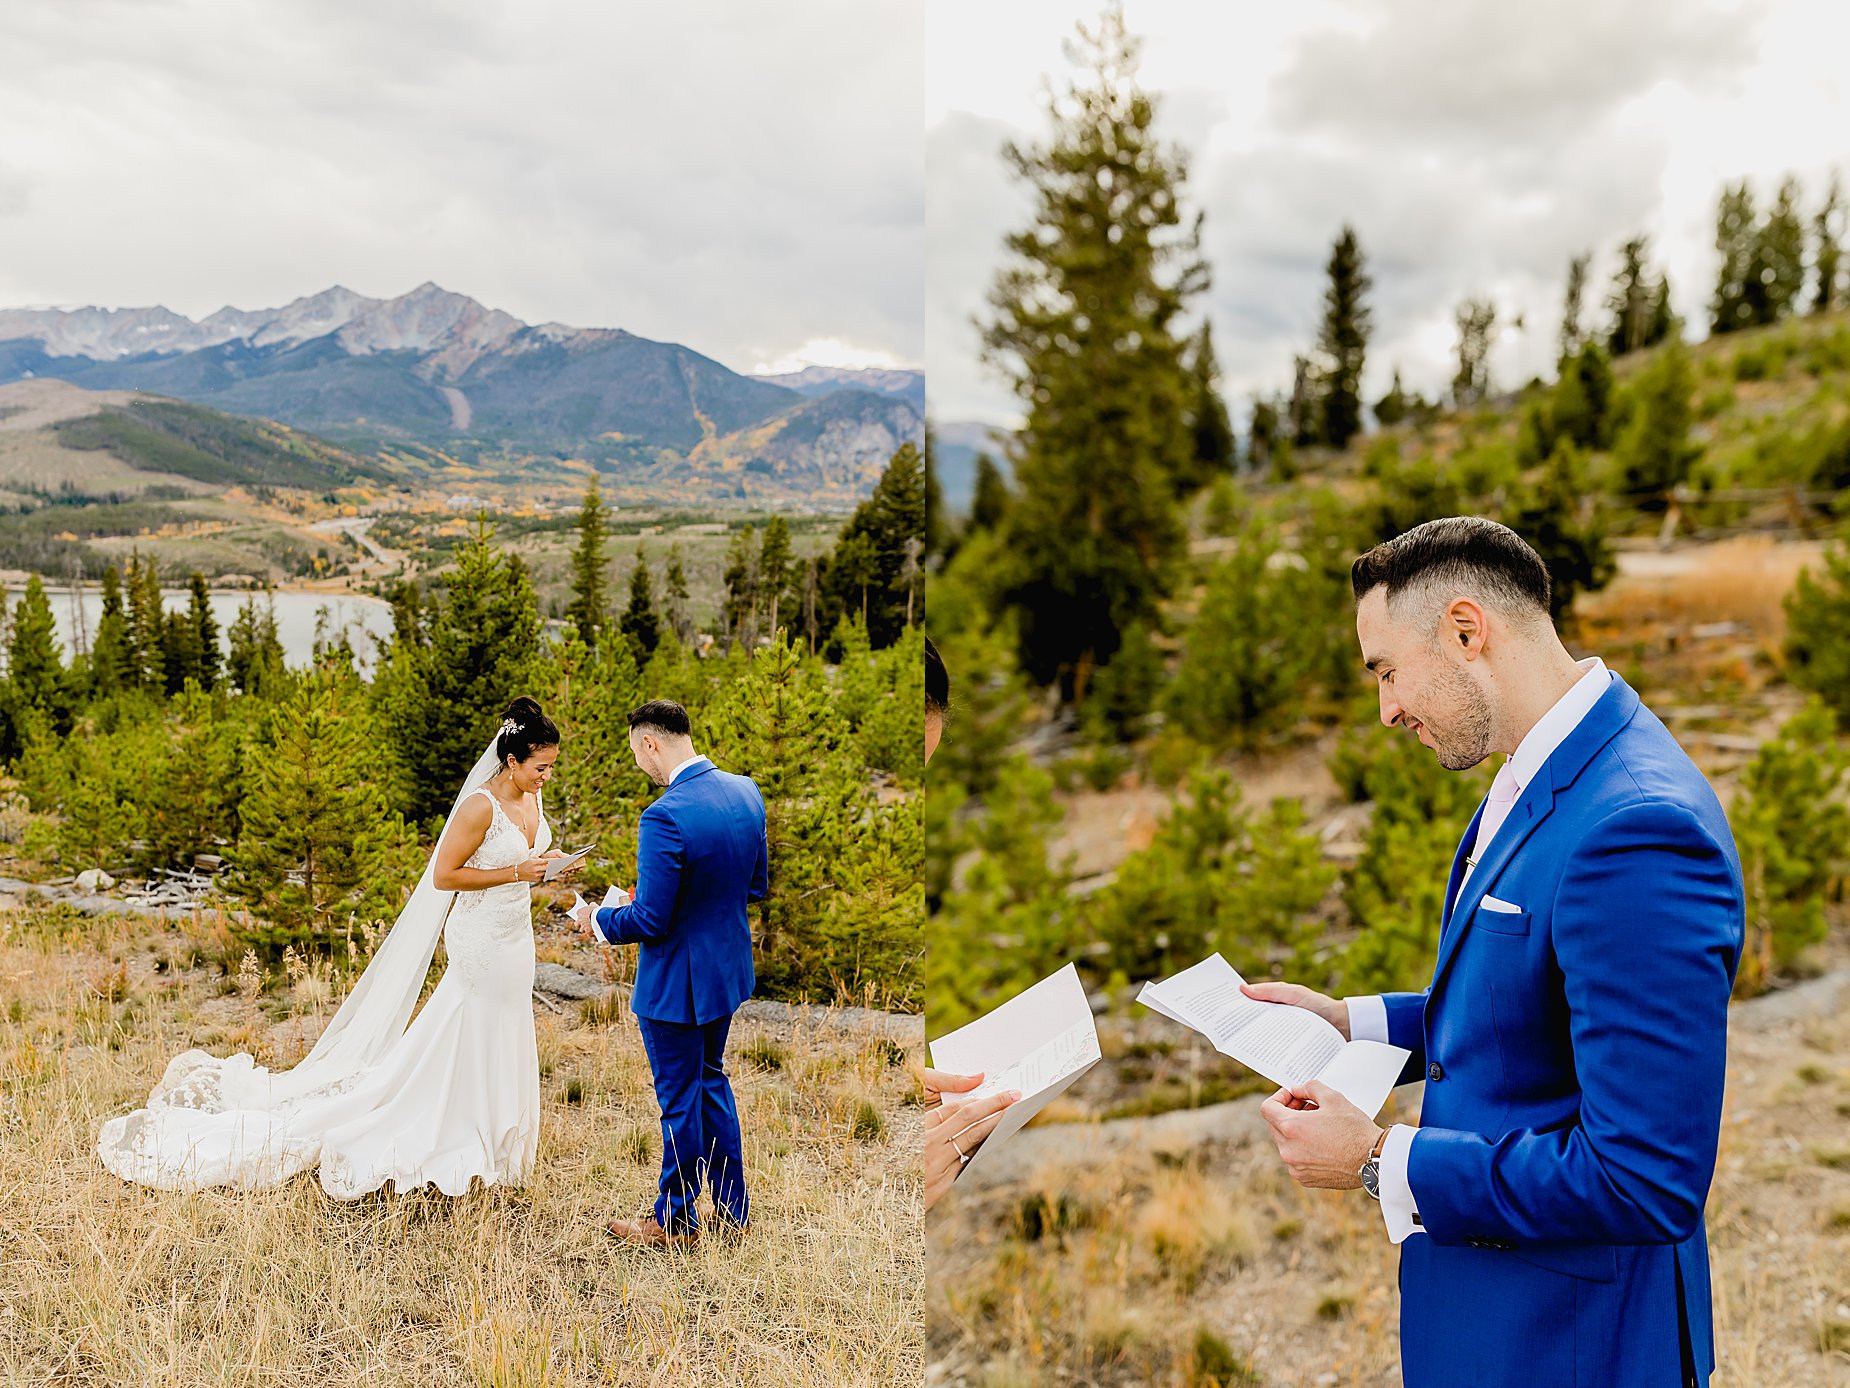 Bride and groom share letters and gifts before their Sapphire Point elopement ceremony with gorgeous mountains and trees in the background, captured by Lauren Casino Photography, a Colorado elopement photographer